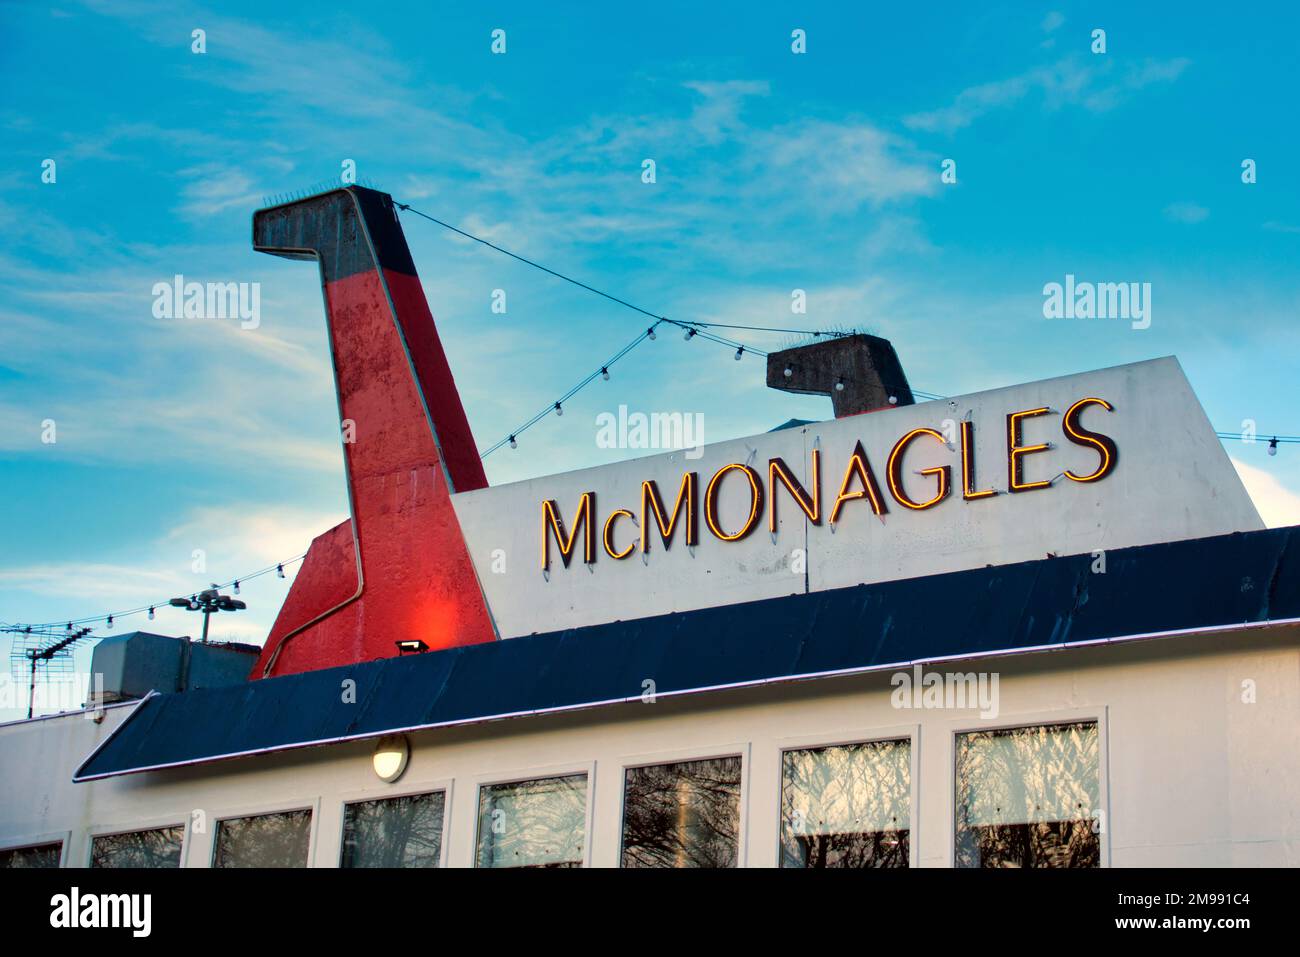 McMonagles signe Fish and chips restaurant boat on the Forth et clyde canal Clyde Shopping Centre 1 Argyll Rd, Clydebank G81 1QA Banque D'Images